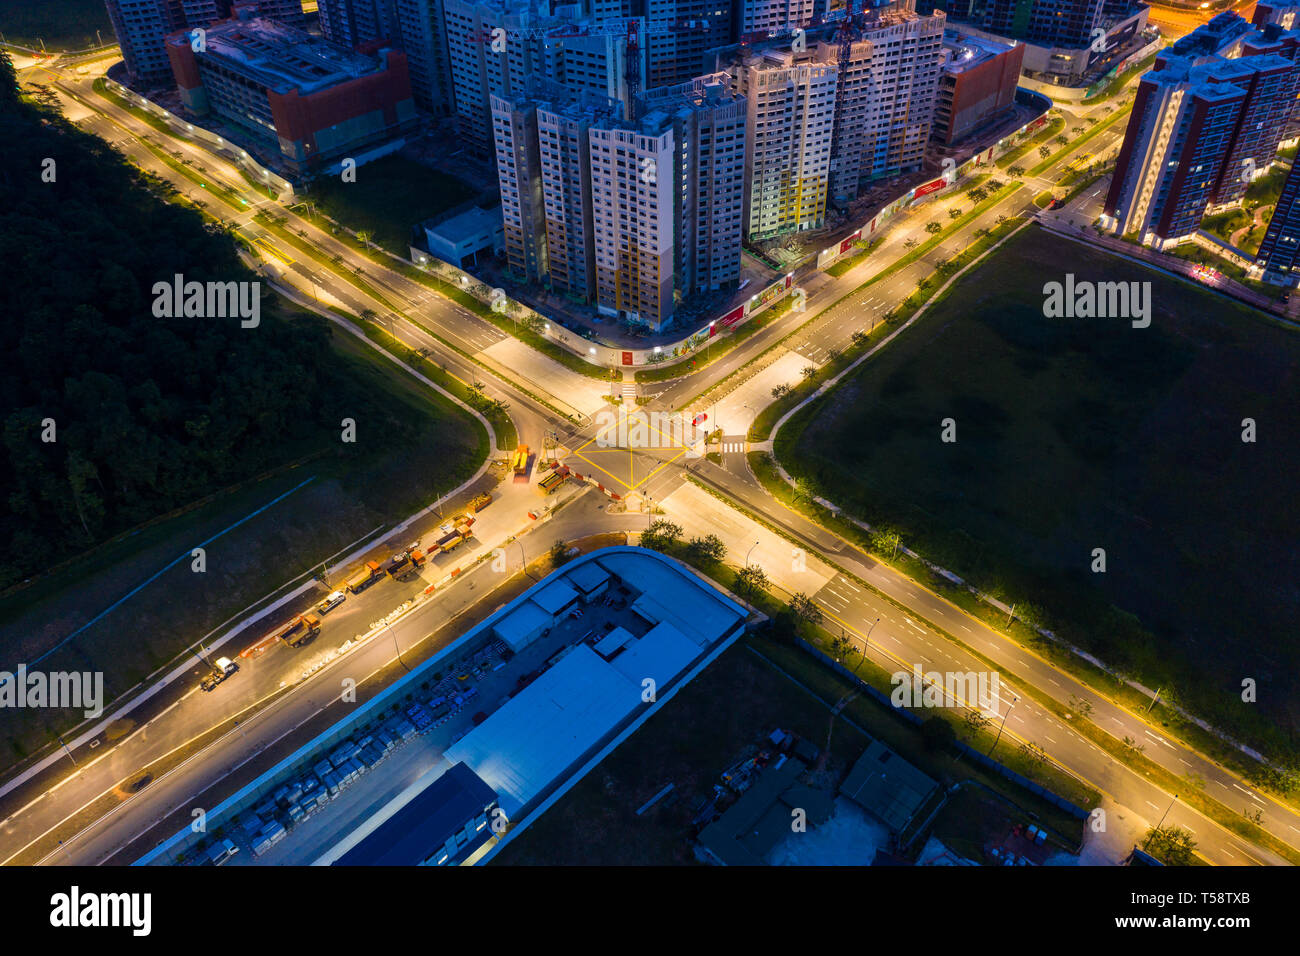 Aerial view of lighted roads cross junction with no traffic in the night Stock Photo